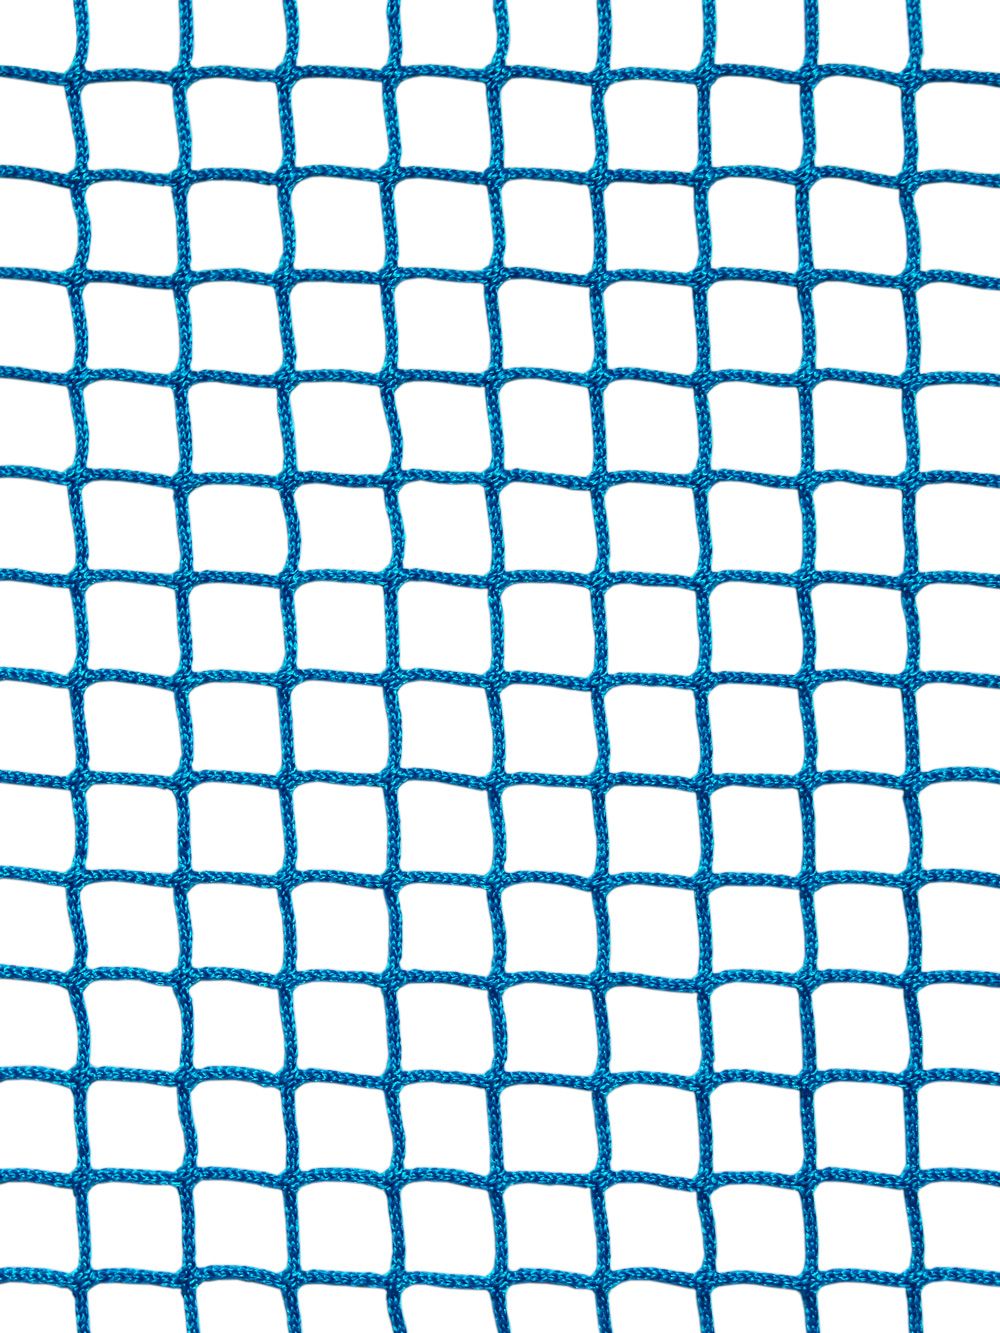 N371BL  InCord Knotless 3/4 inch Blue Custom Safety Netting